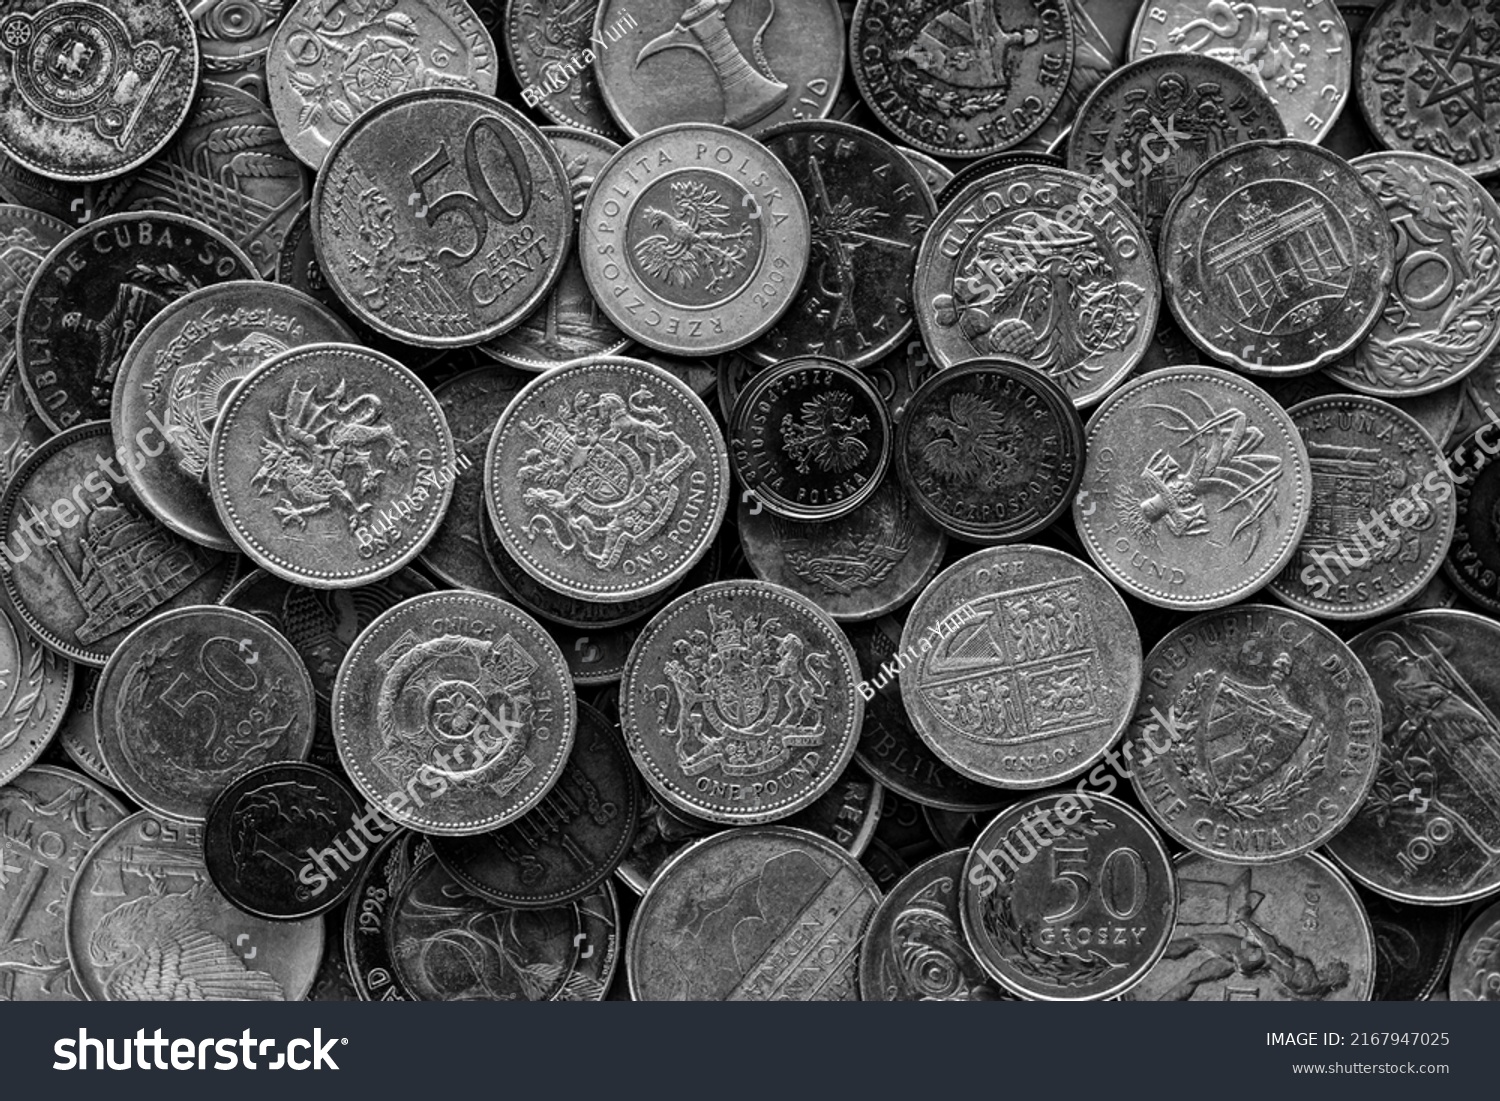 Background of Euro coins money.Numismatics.United kingdom Pound coin.US coins.Coins of different countries of the world. Iron money.Collection  #2167947025